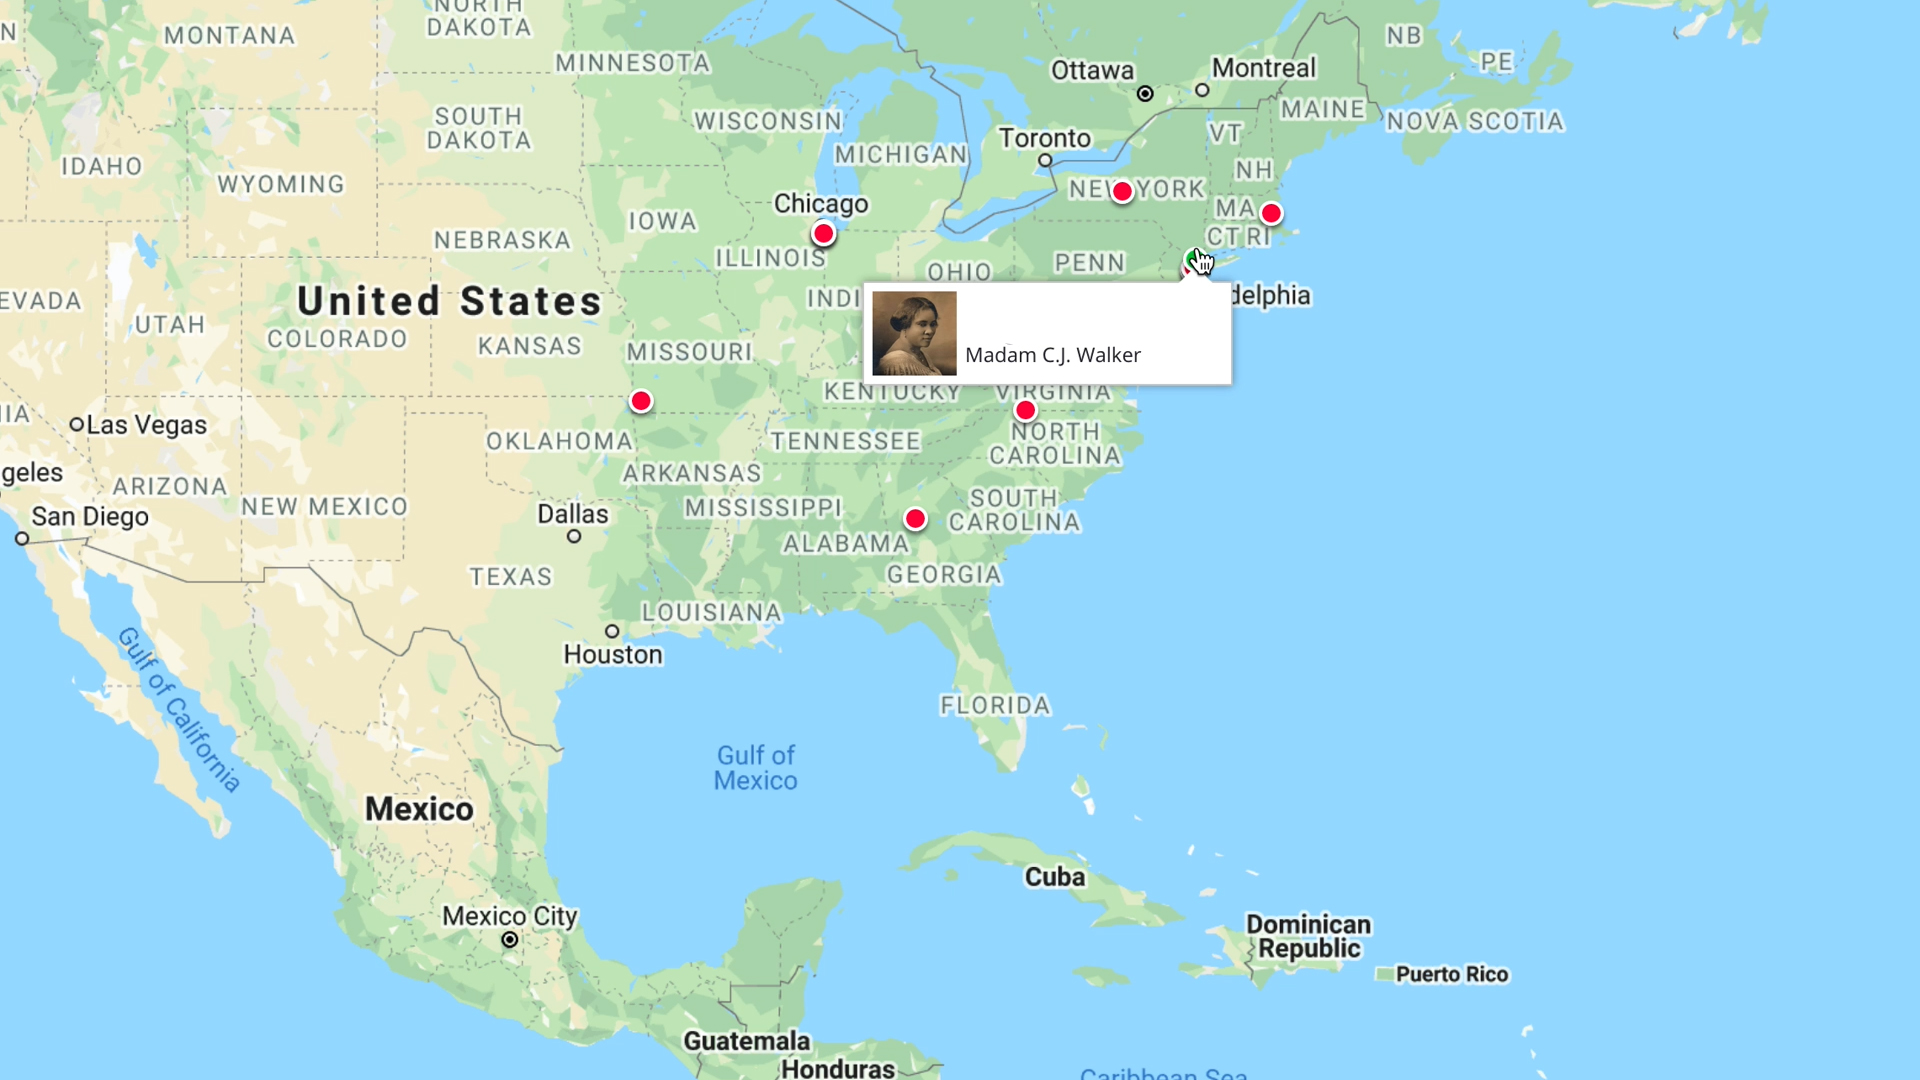 Screenshot of map of the United States from the Blacks Across America application created during Zillow Hack Week 20